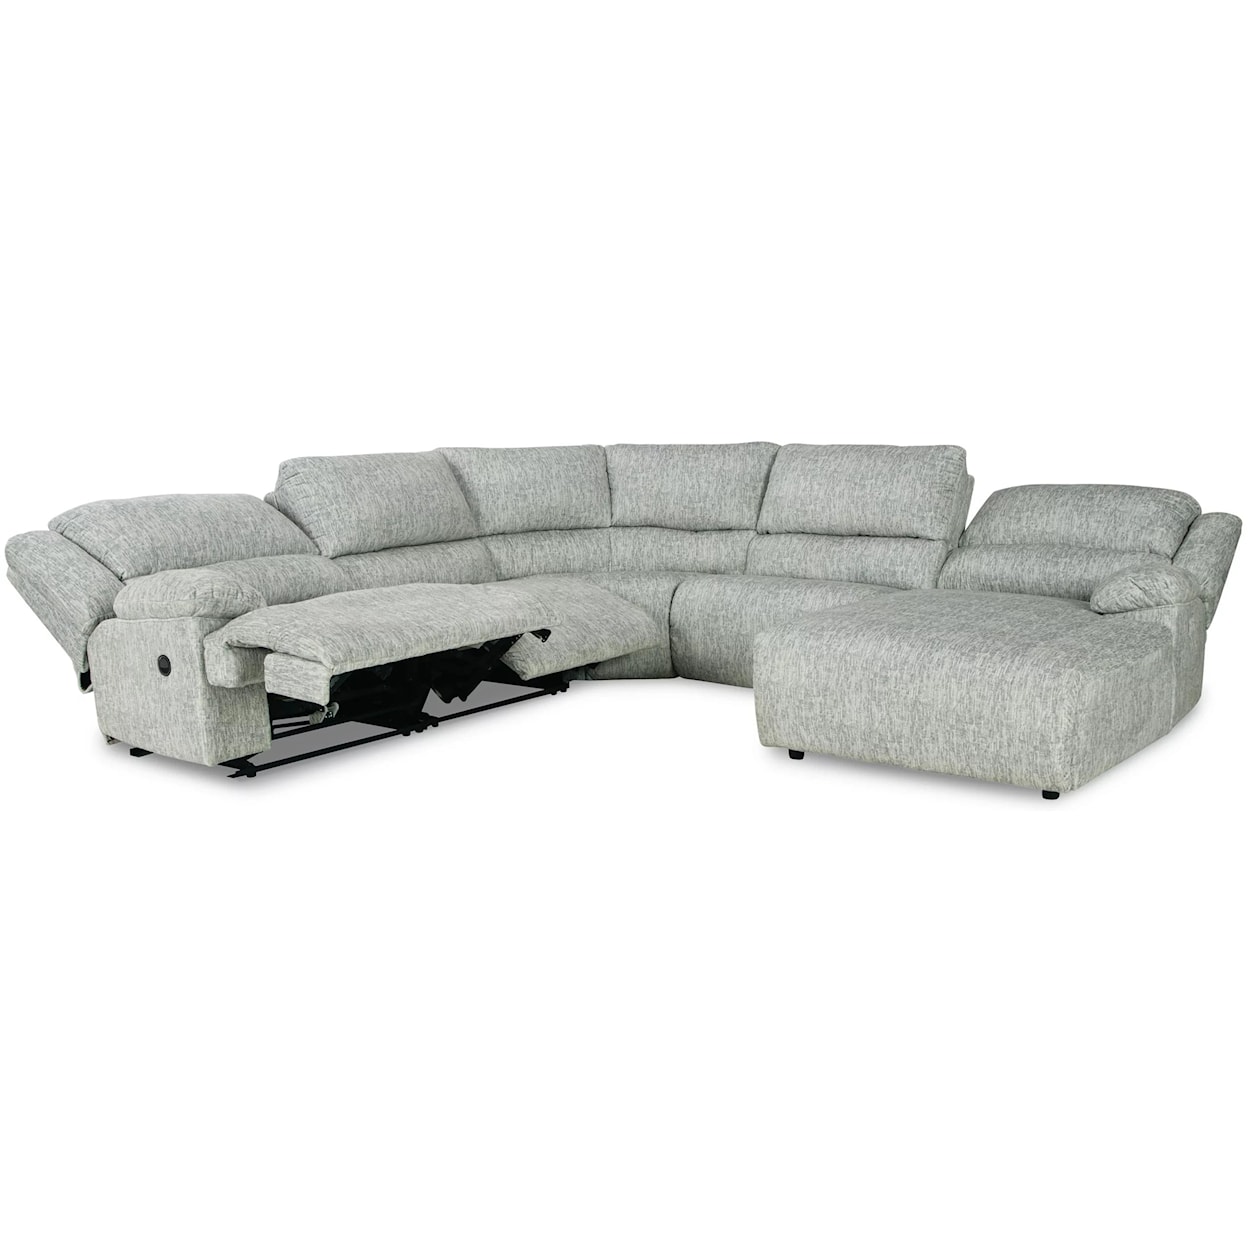 Ashley Furniture Signature Design McClelland 5-Piece Reclining Sectional with Chaise